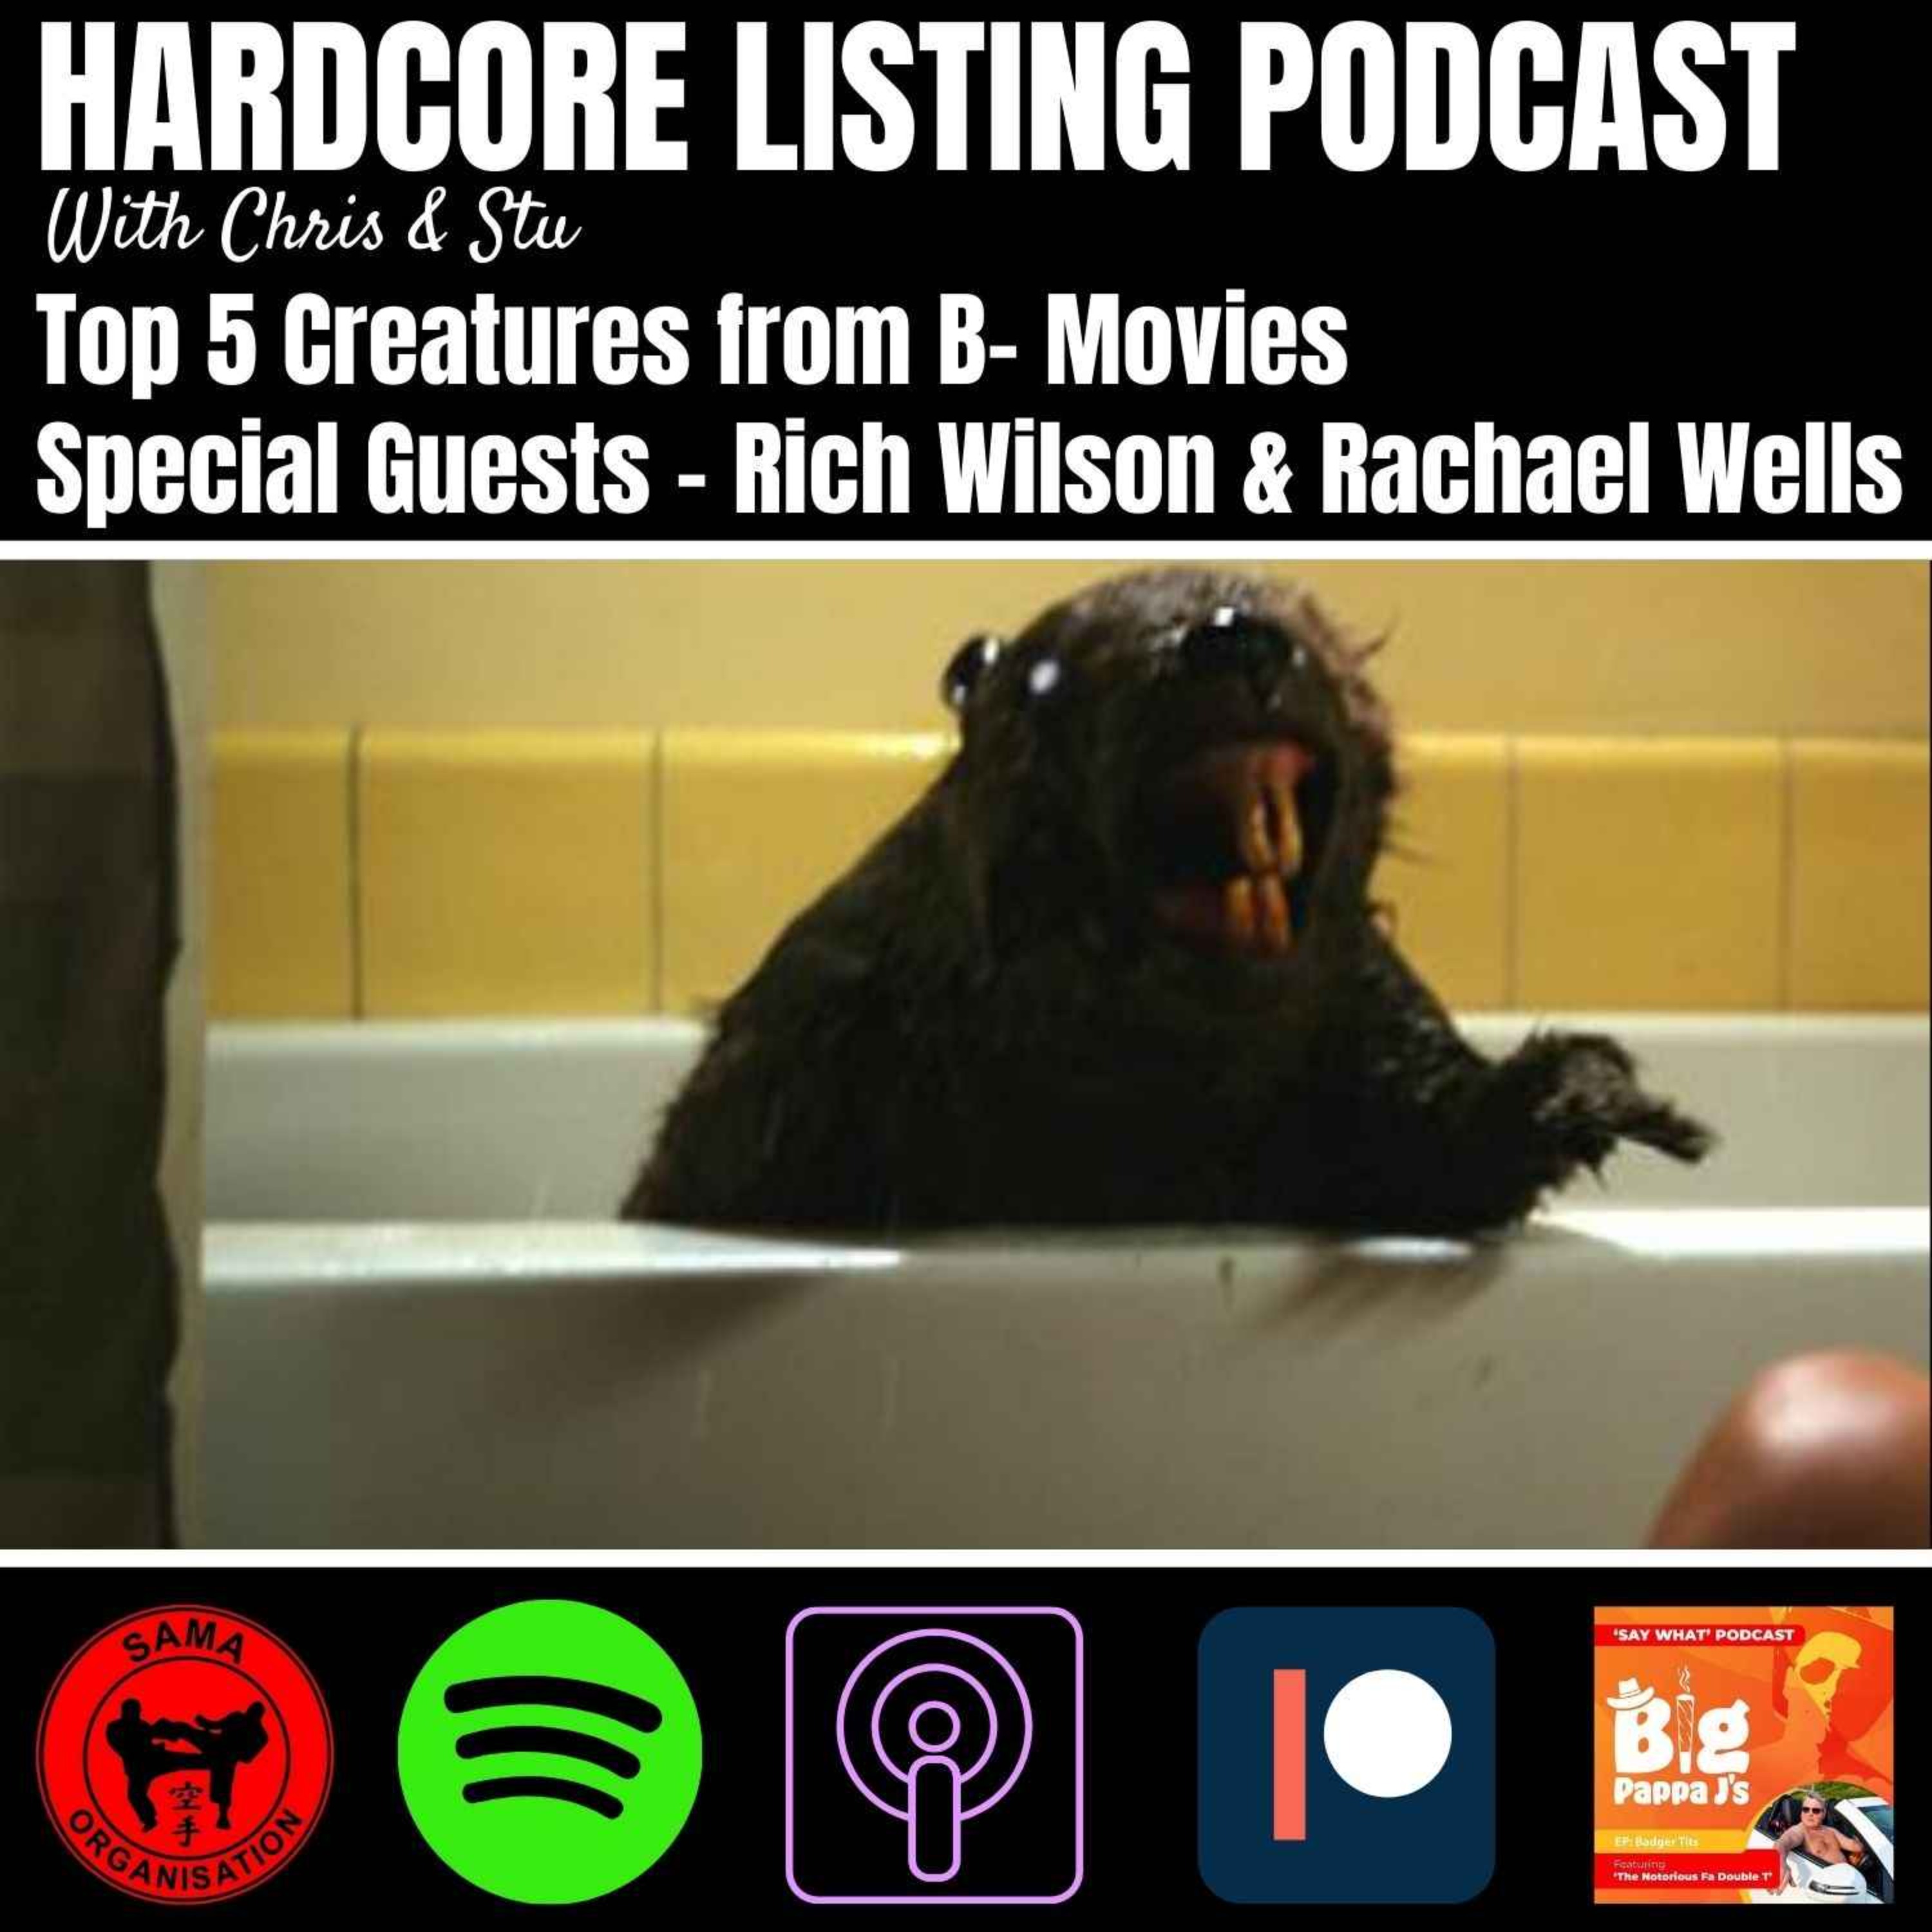 Top 5 Creatures from B-Movies with Rich Wilson & Rachael Wells